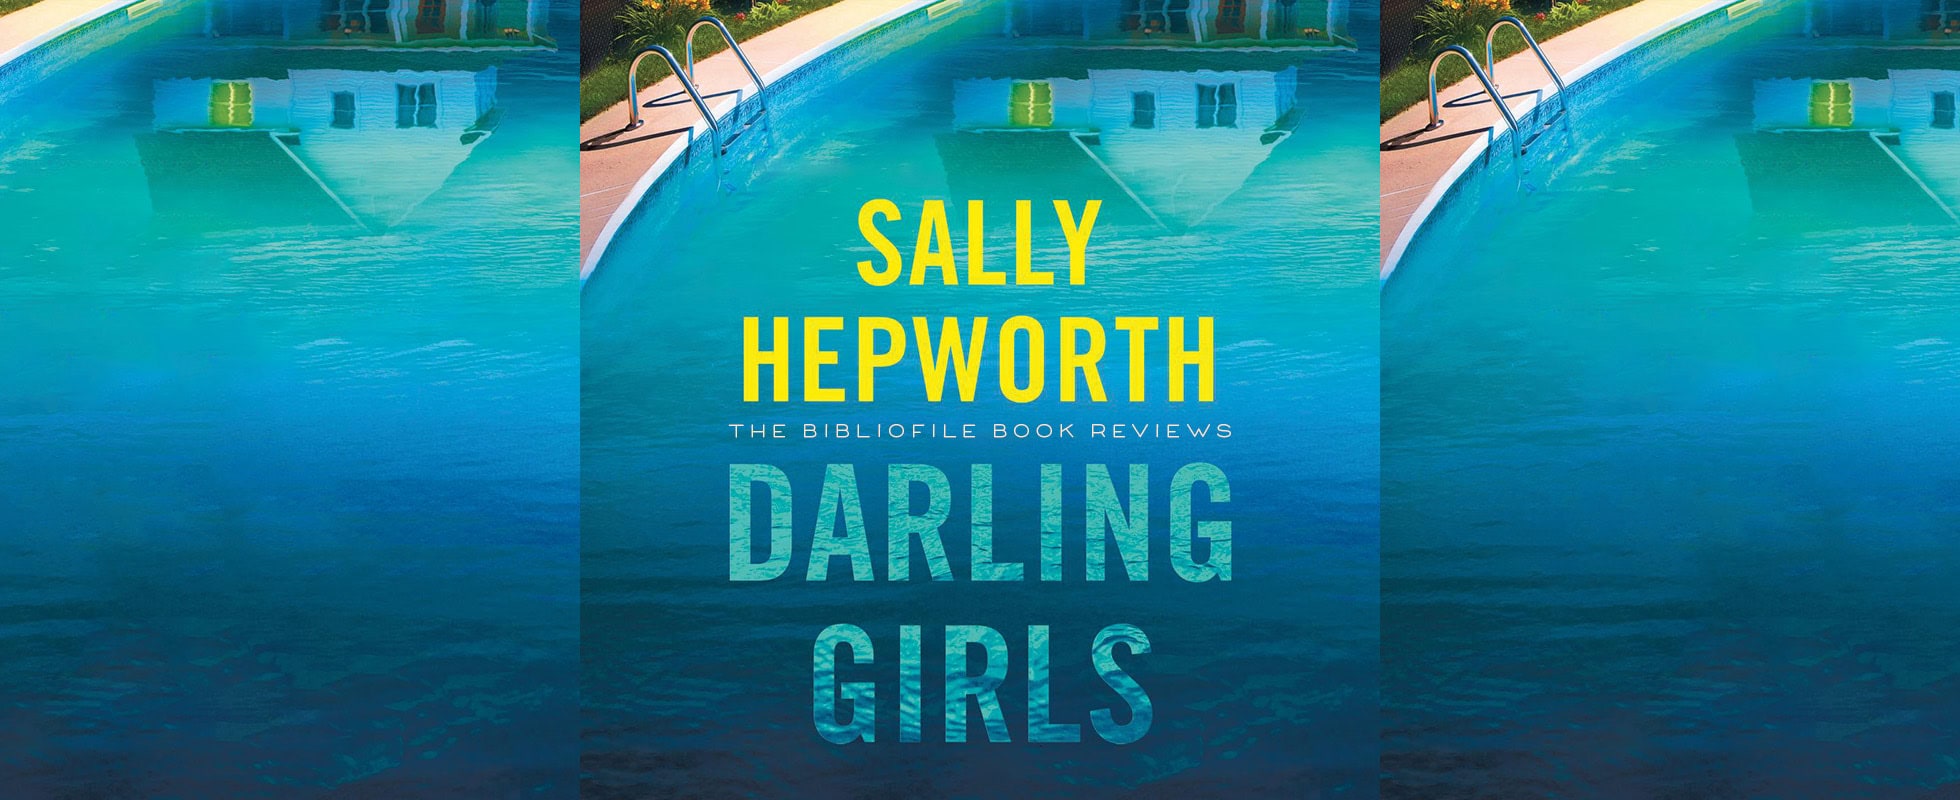 darling girls by sally hepworth book review plot summary synopsis recap discussion spoilers